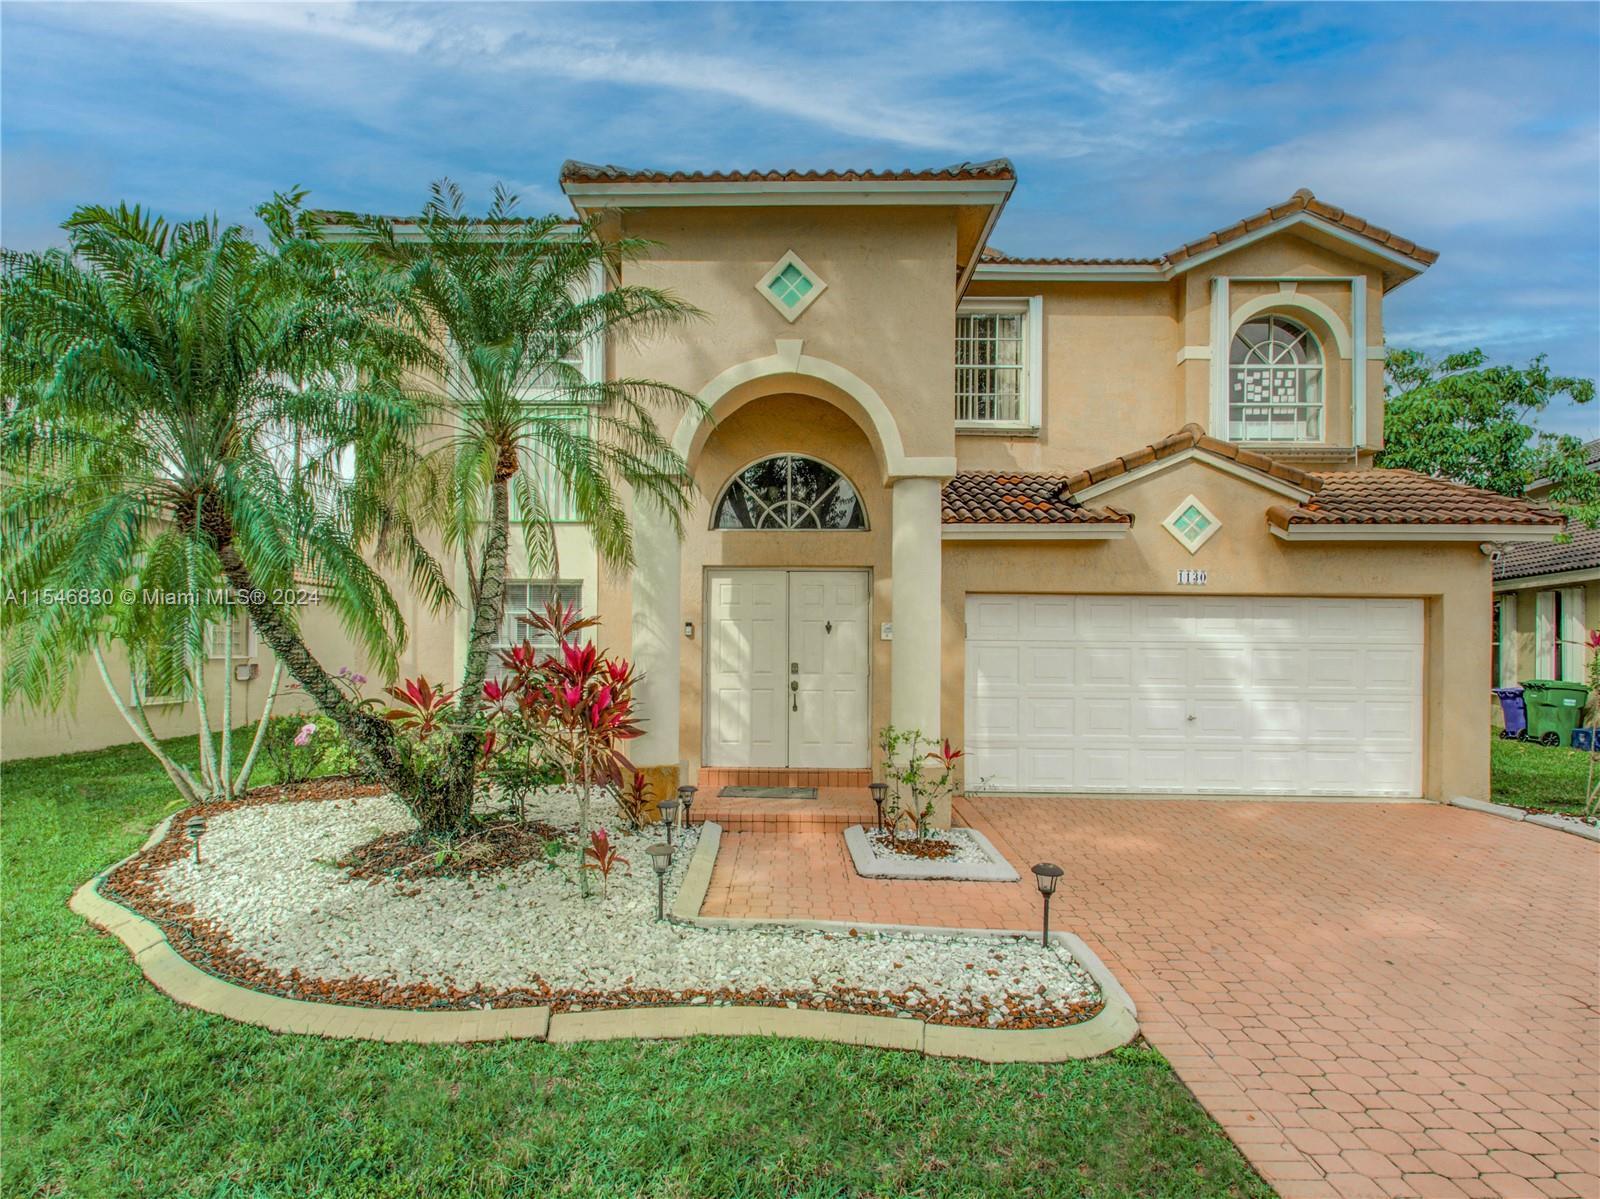 Photo of 1130 NW 184th Pl in Pembroke Pines, FL